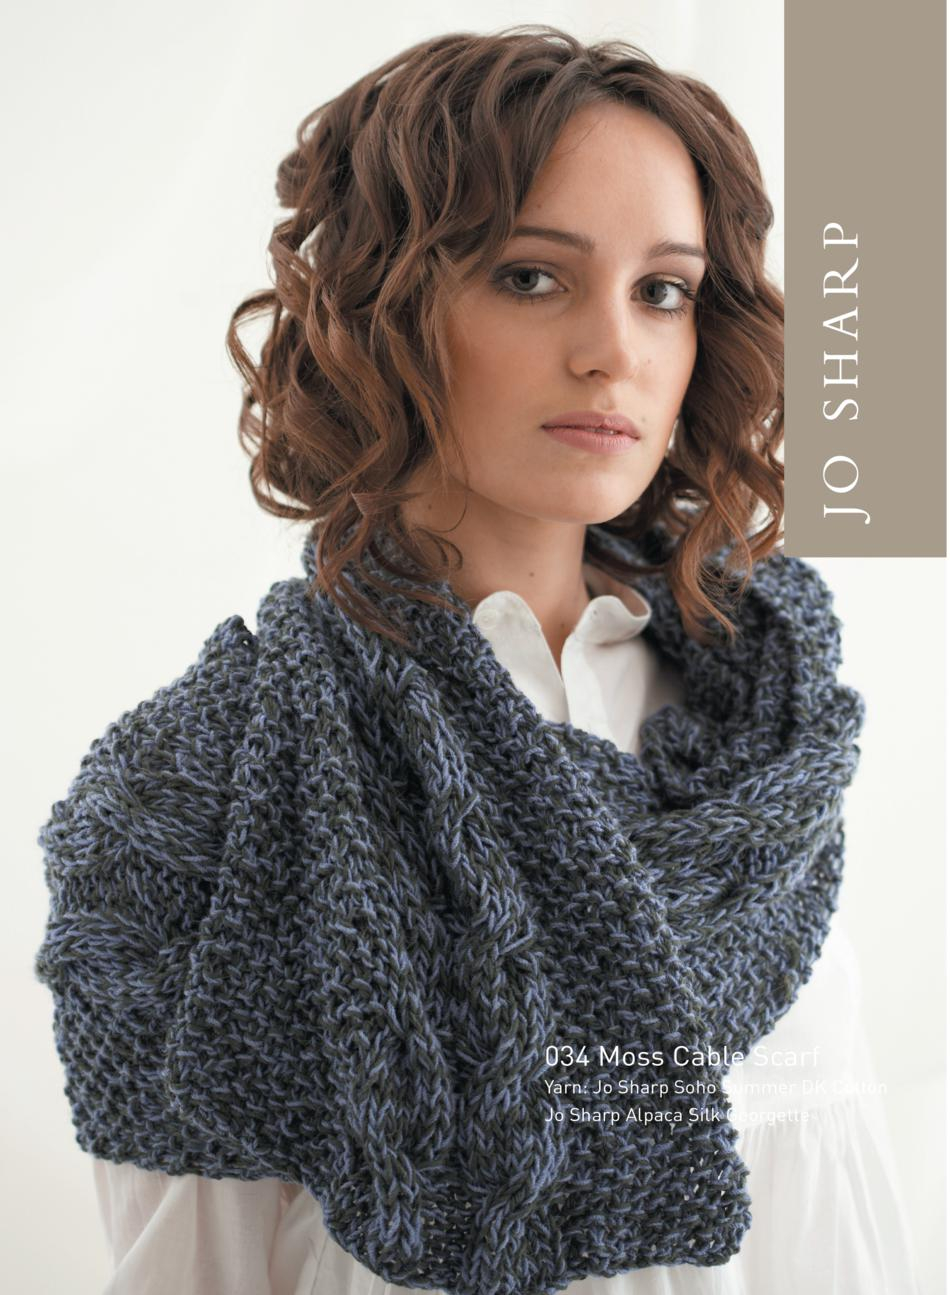 Knitted Cable Scarf Patterns Jo Sharp Moss Cabled Scarf Pattern Knitting Pattern